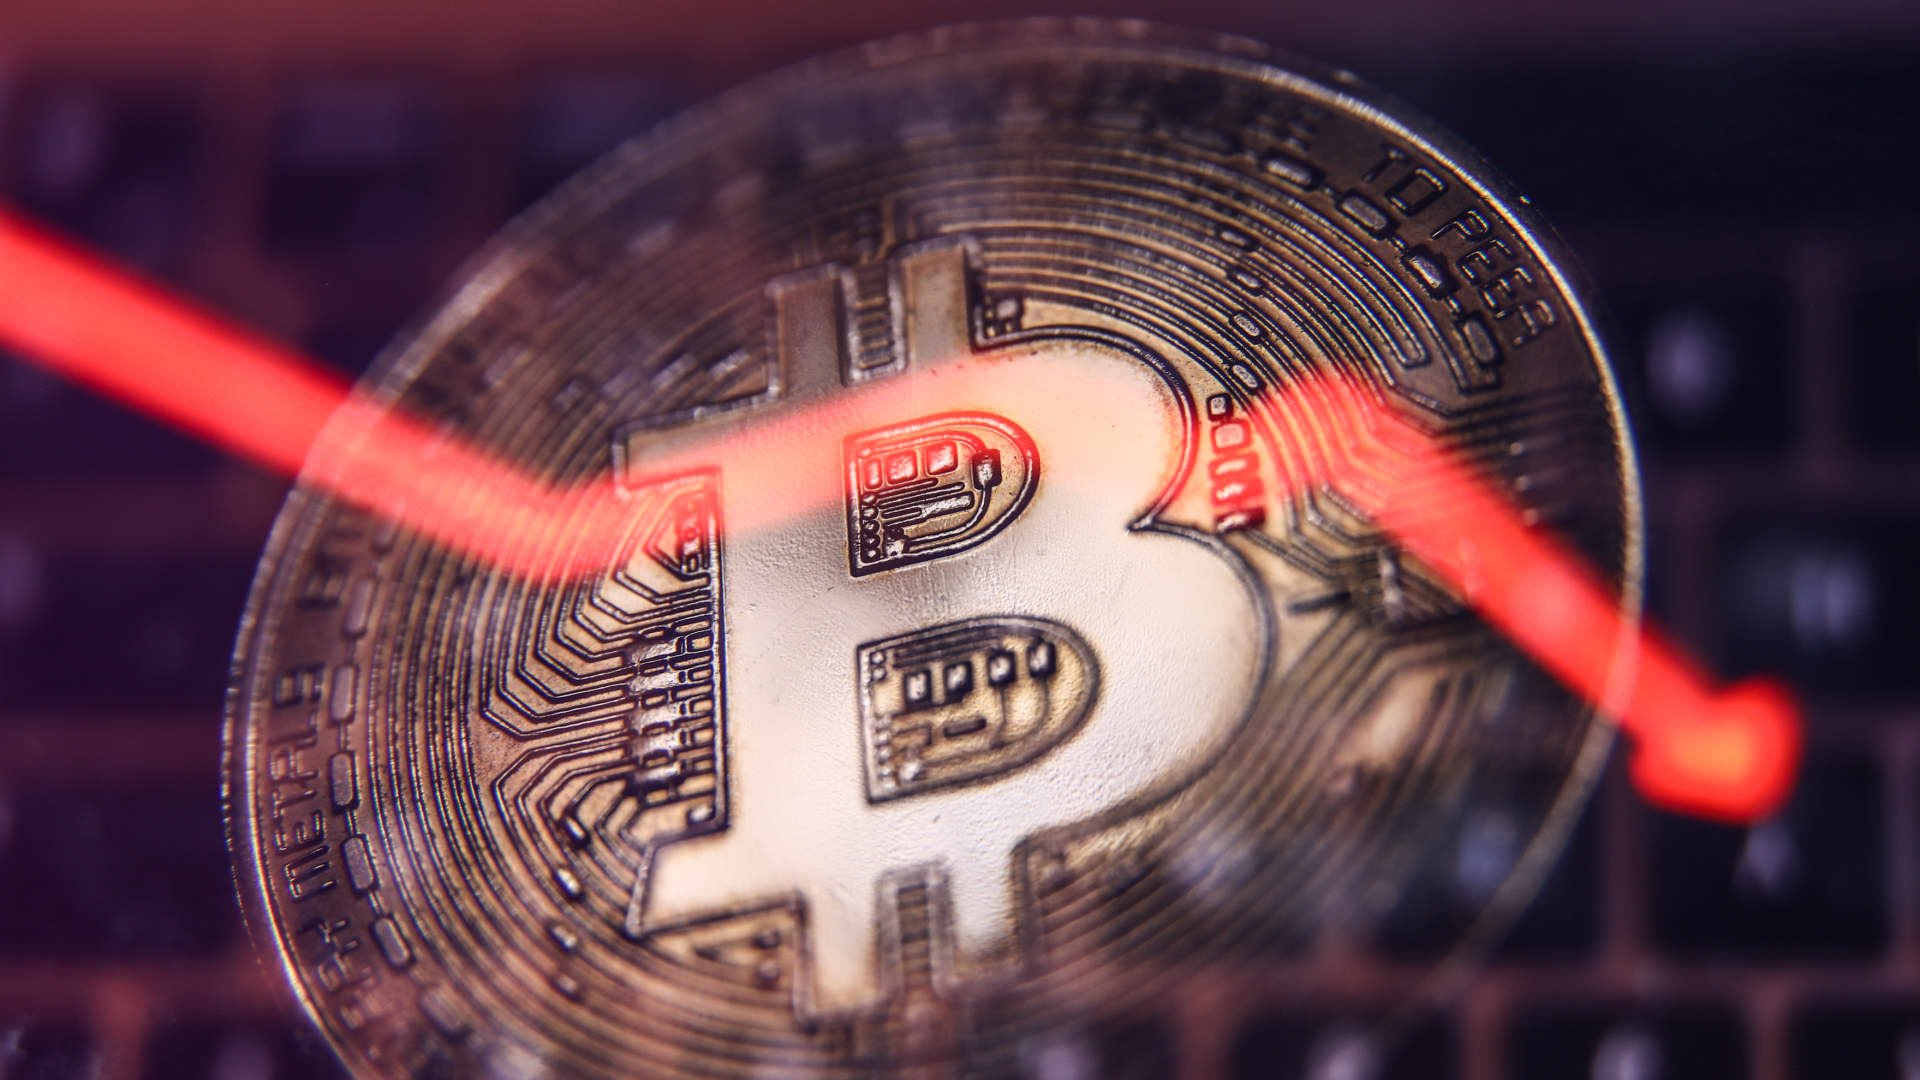 Bitcoin drops 17%, falling below $23,000 as $200 billion wiped off crypto market over the weekend